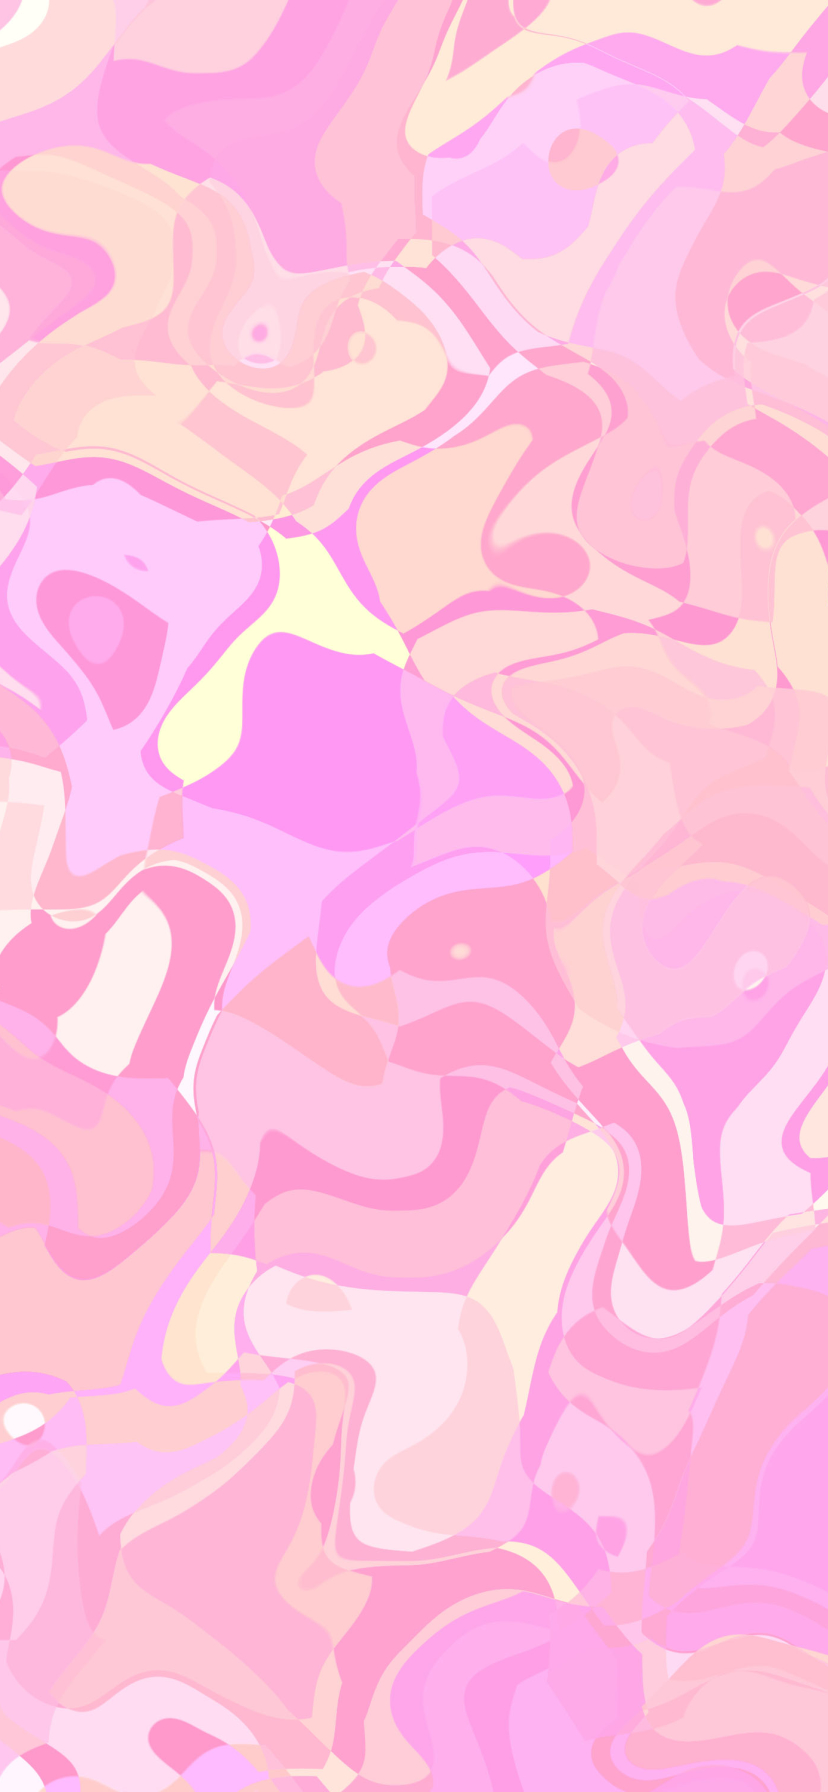 Abstract pink